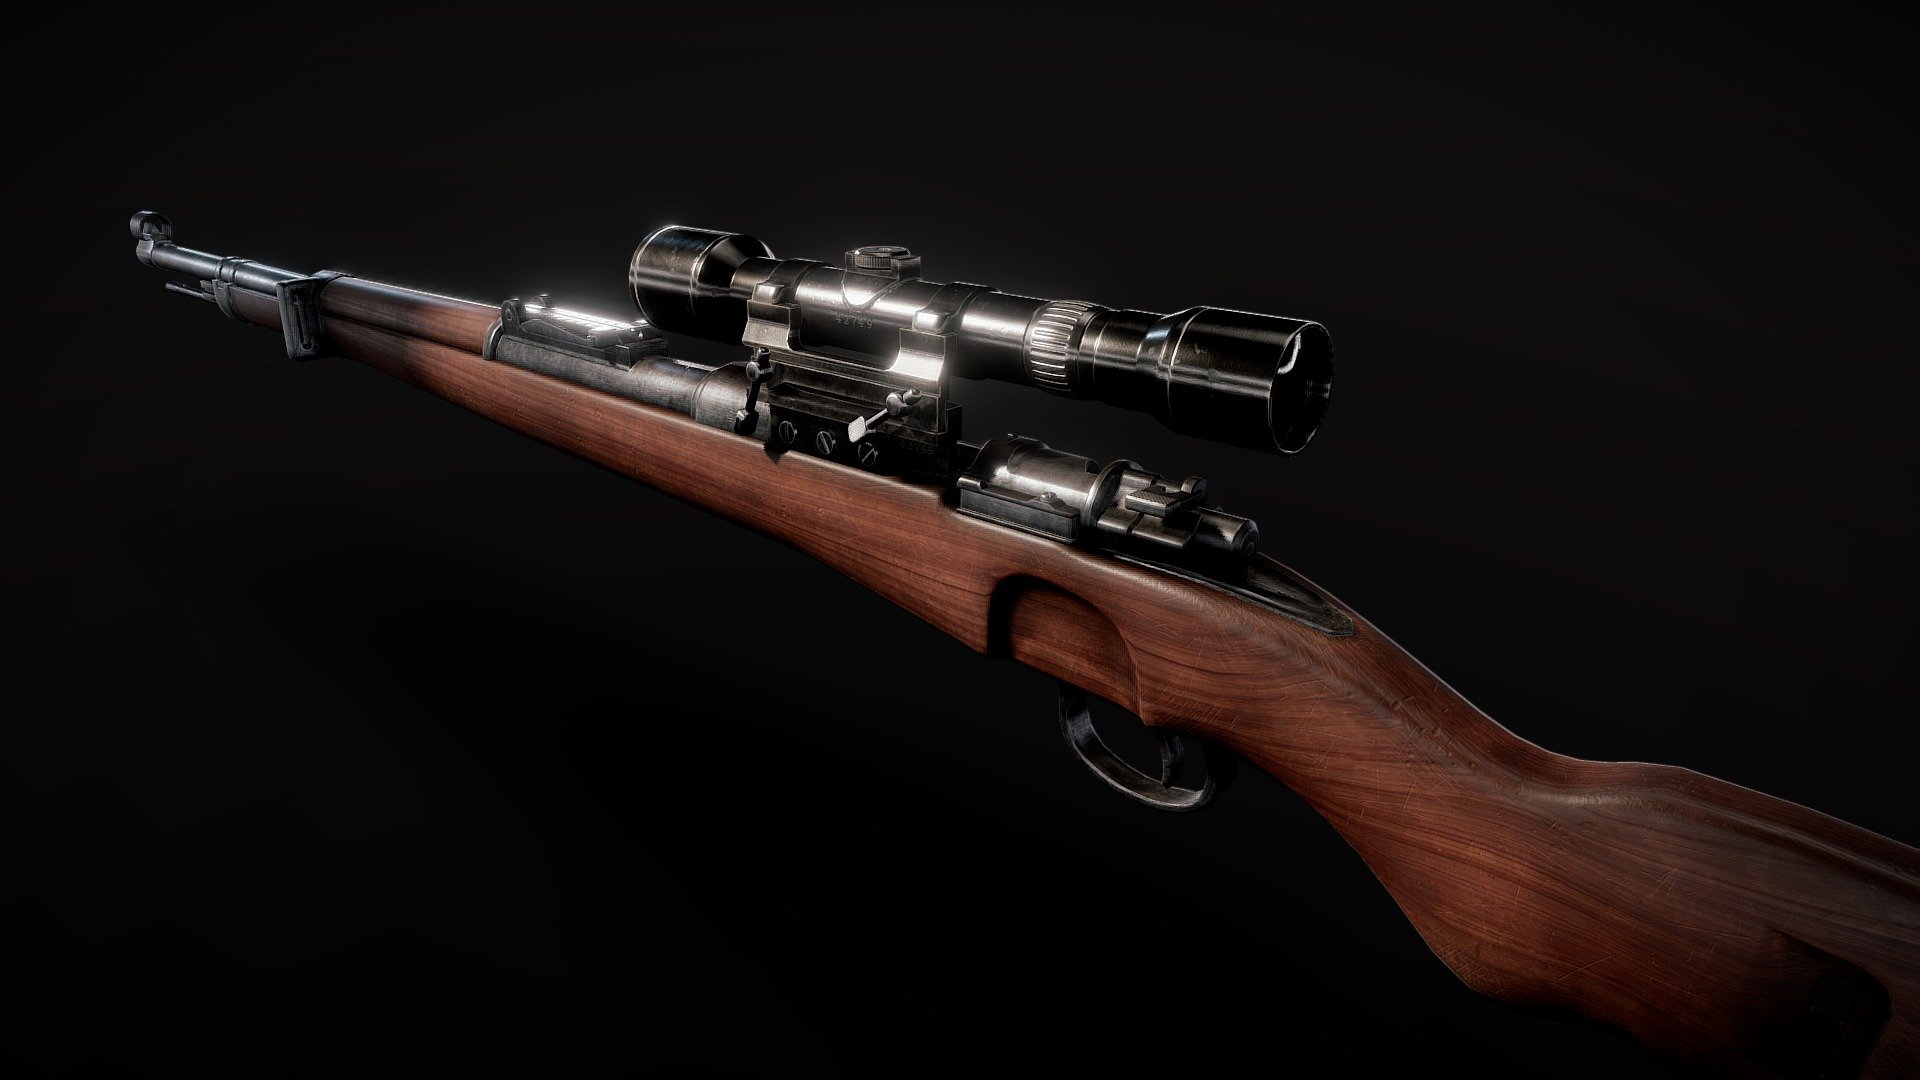 This is a WWII Karabiner 98 bolt action rifle in sniper configuration.
This model is low poly and is good for mobile games 3d model